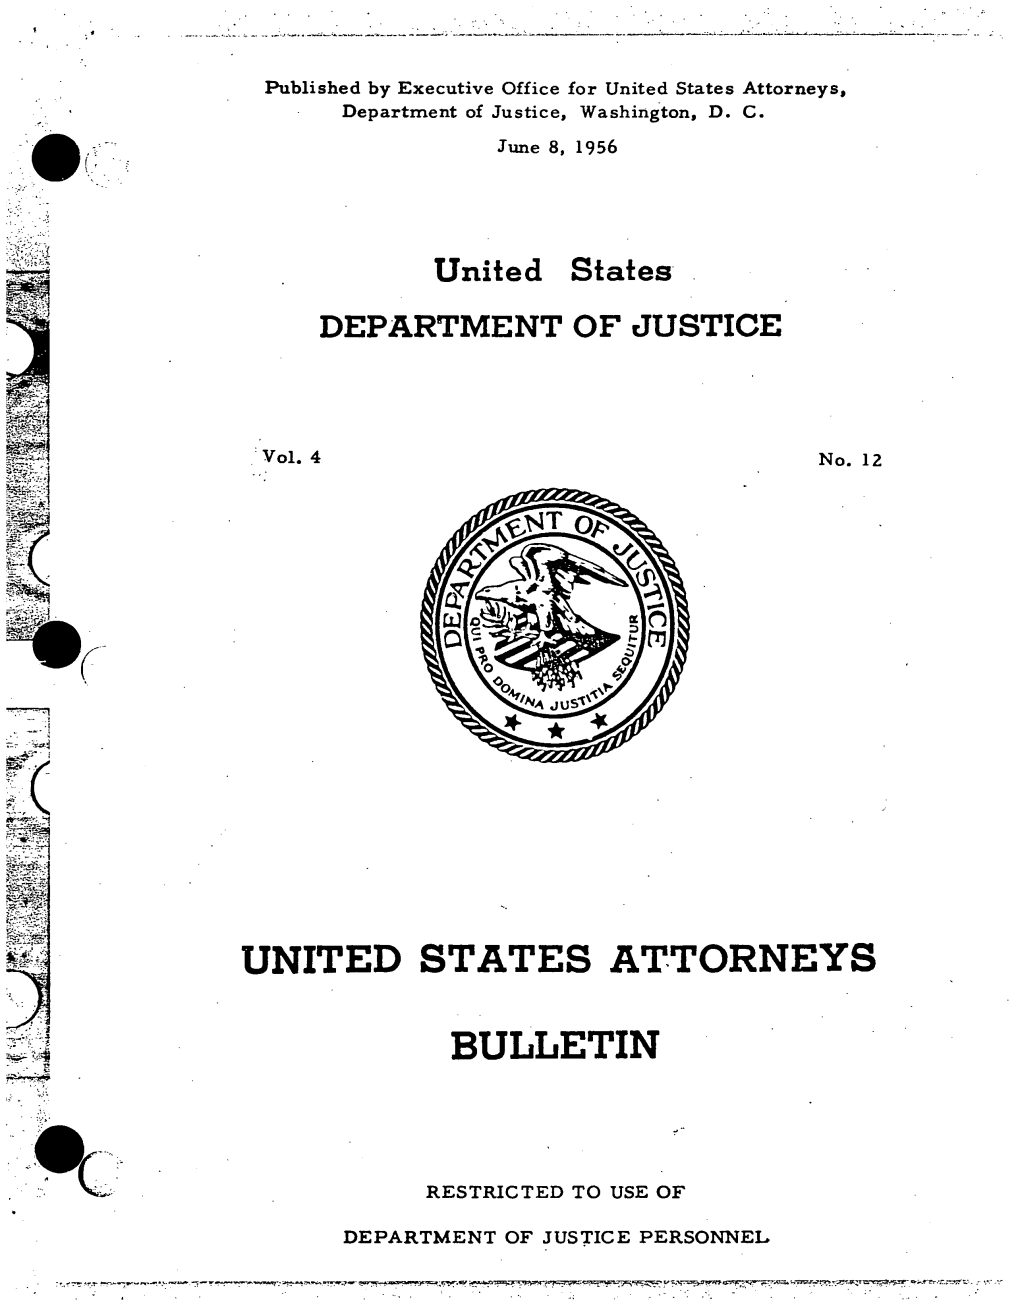 United States Attorneys Department of Justice Washington